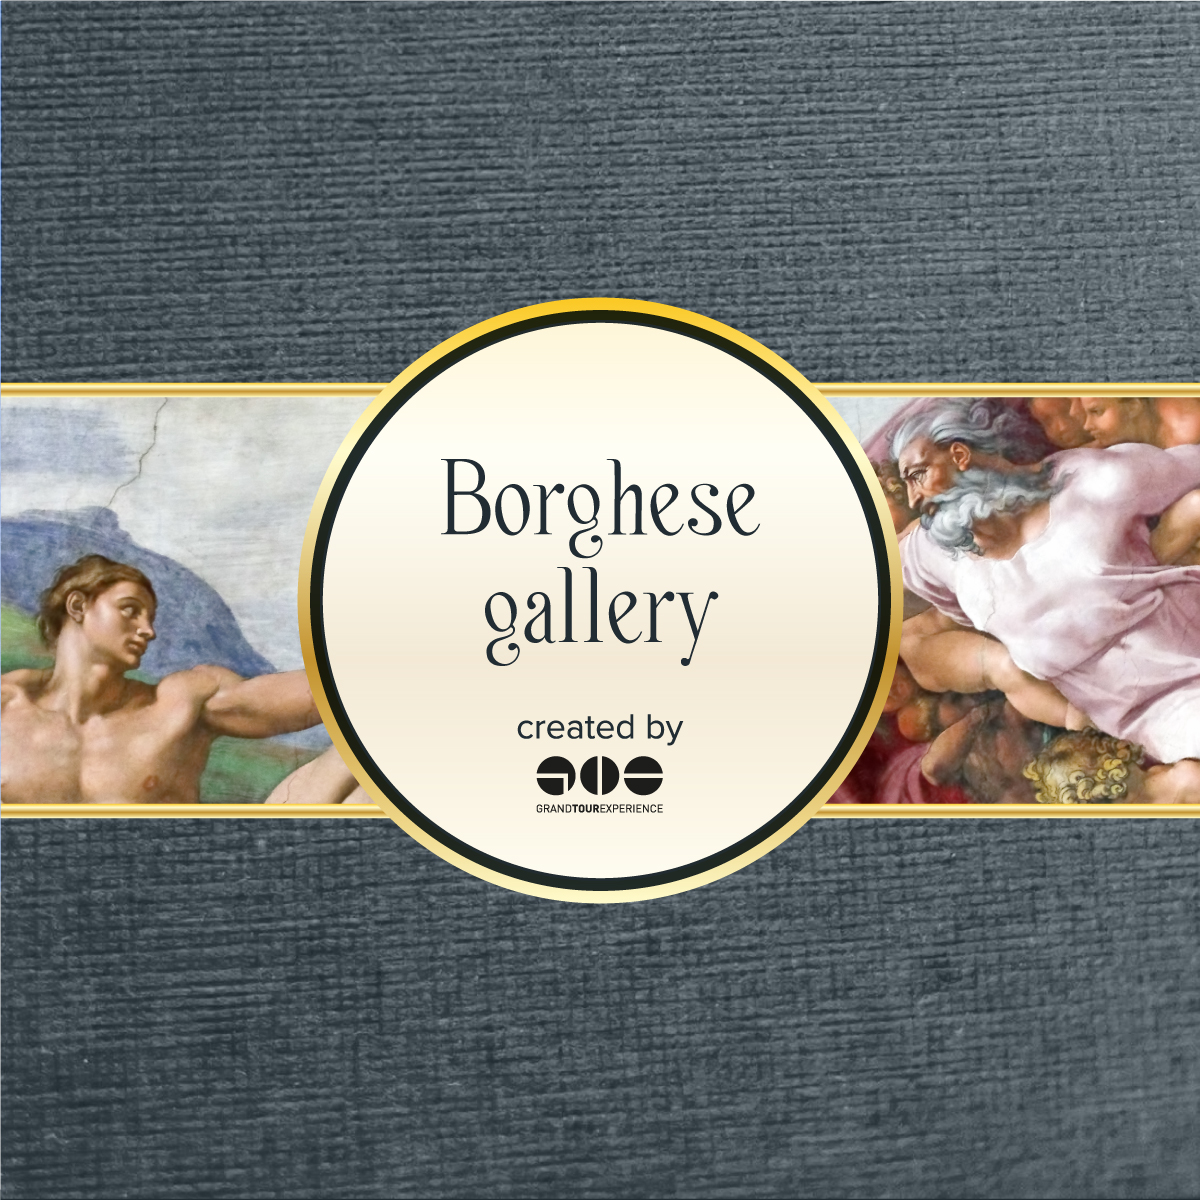 Borghese Gallery: a Real Treasure Chest